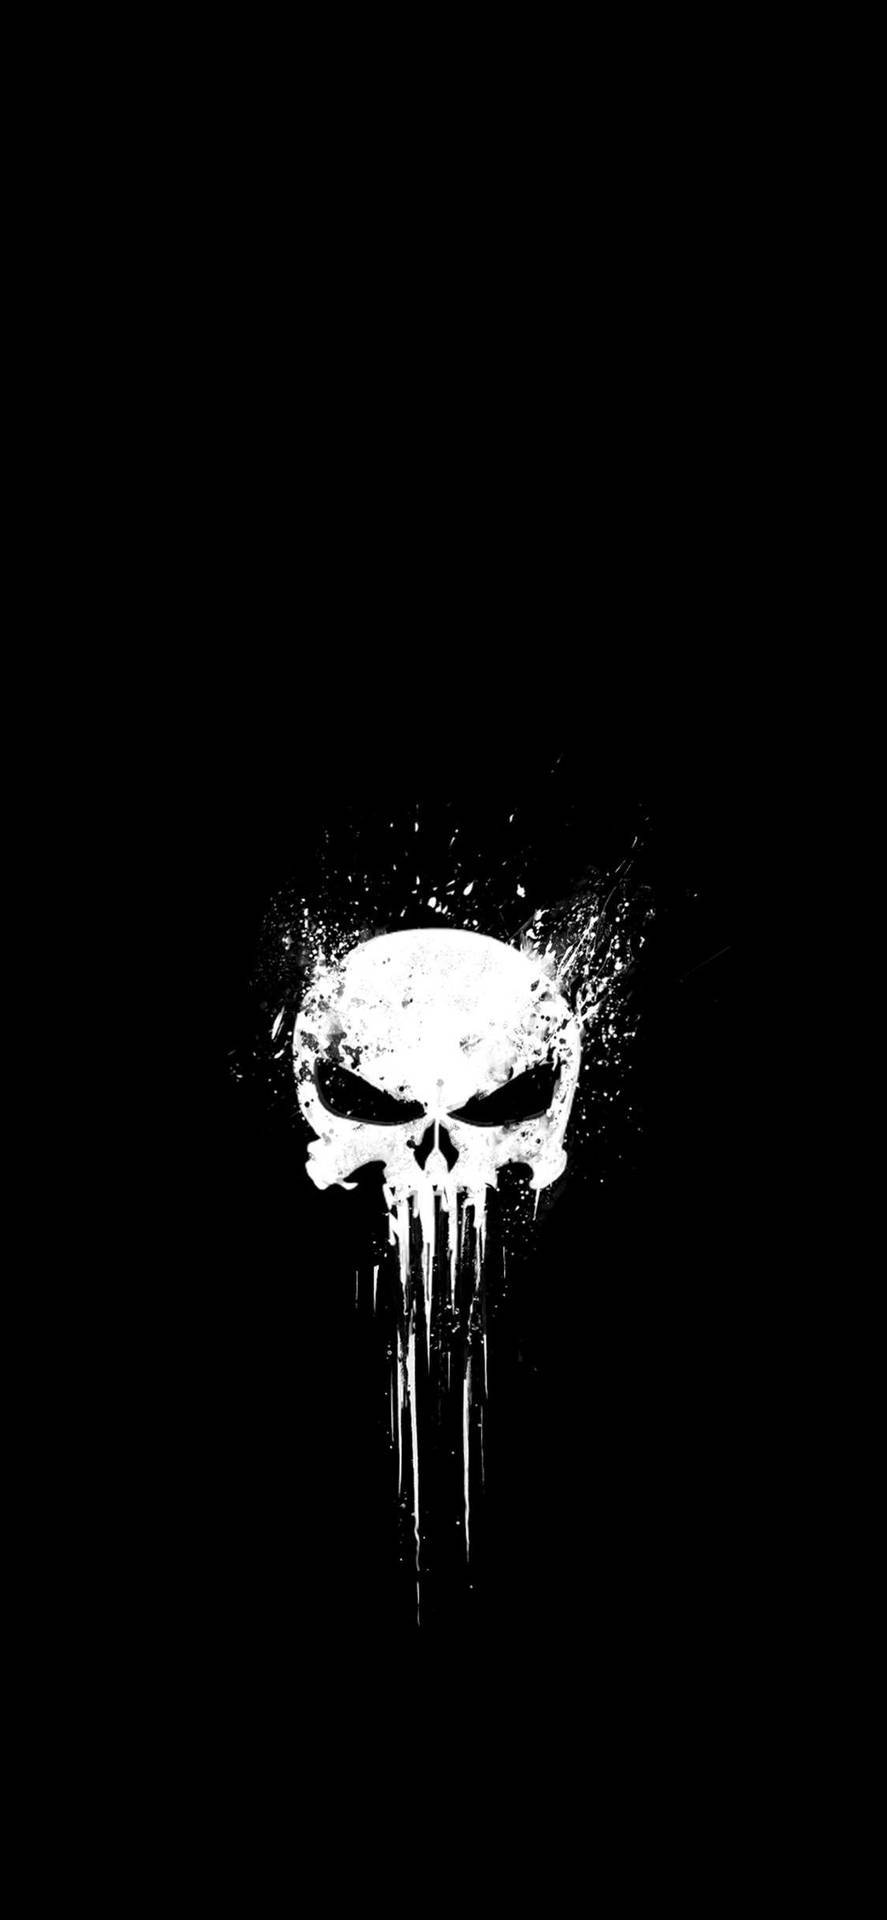 Punisher Skull With Drops Wallpaper